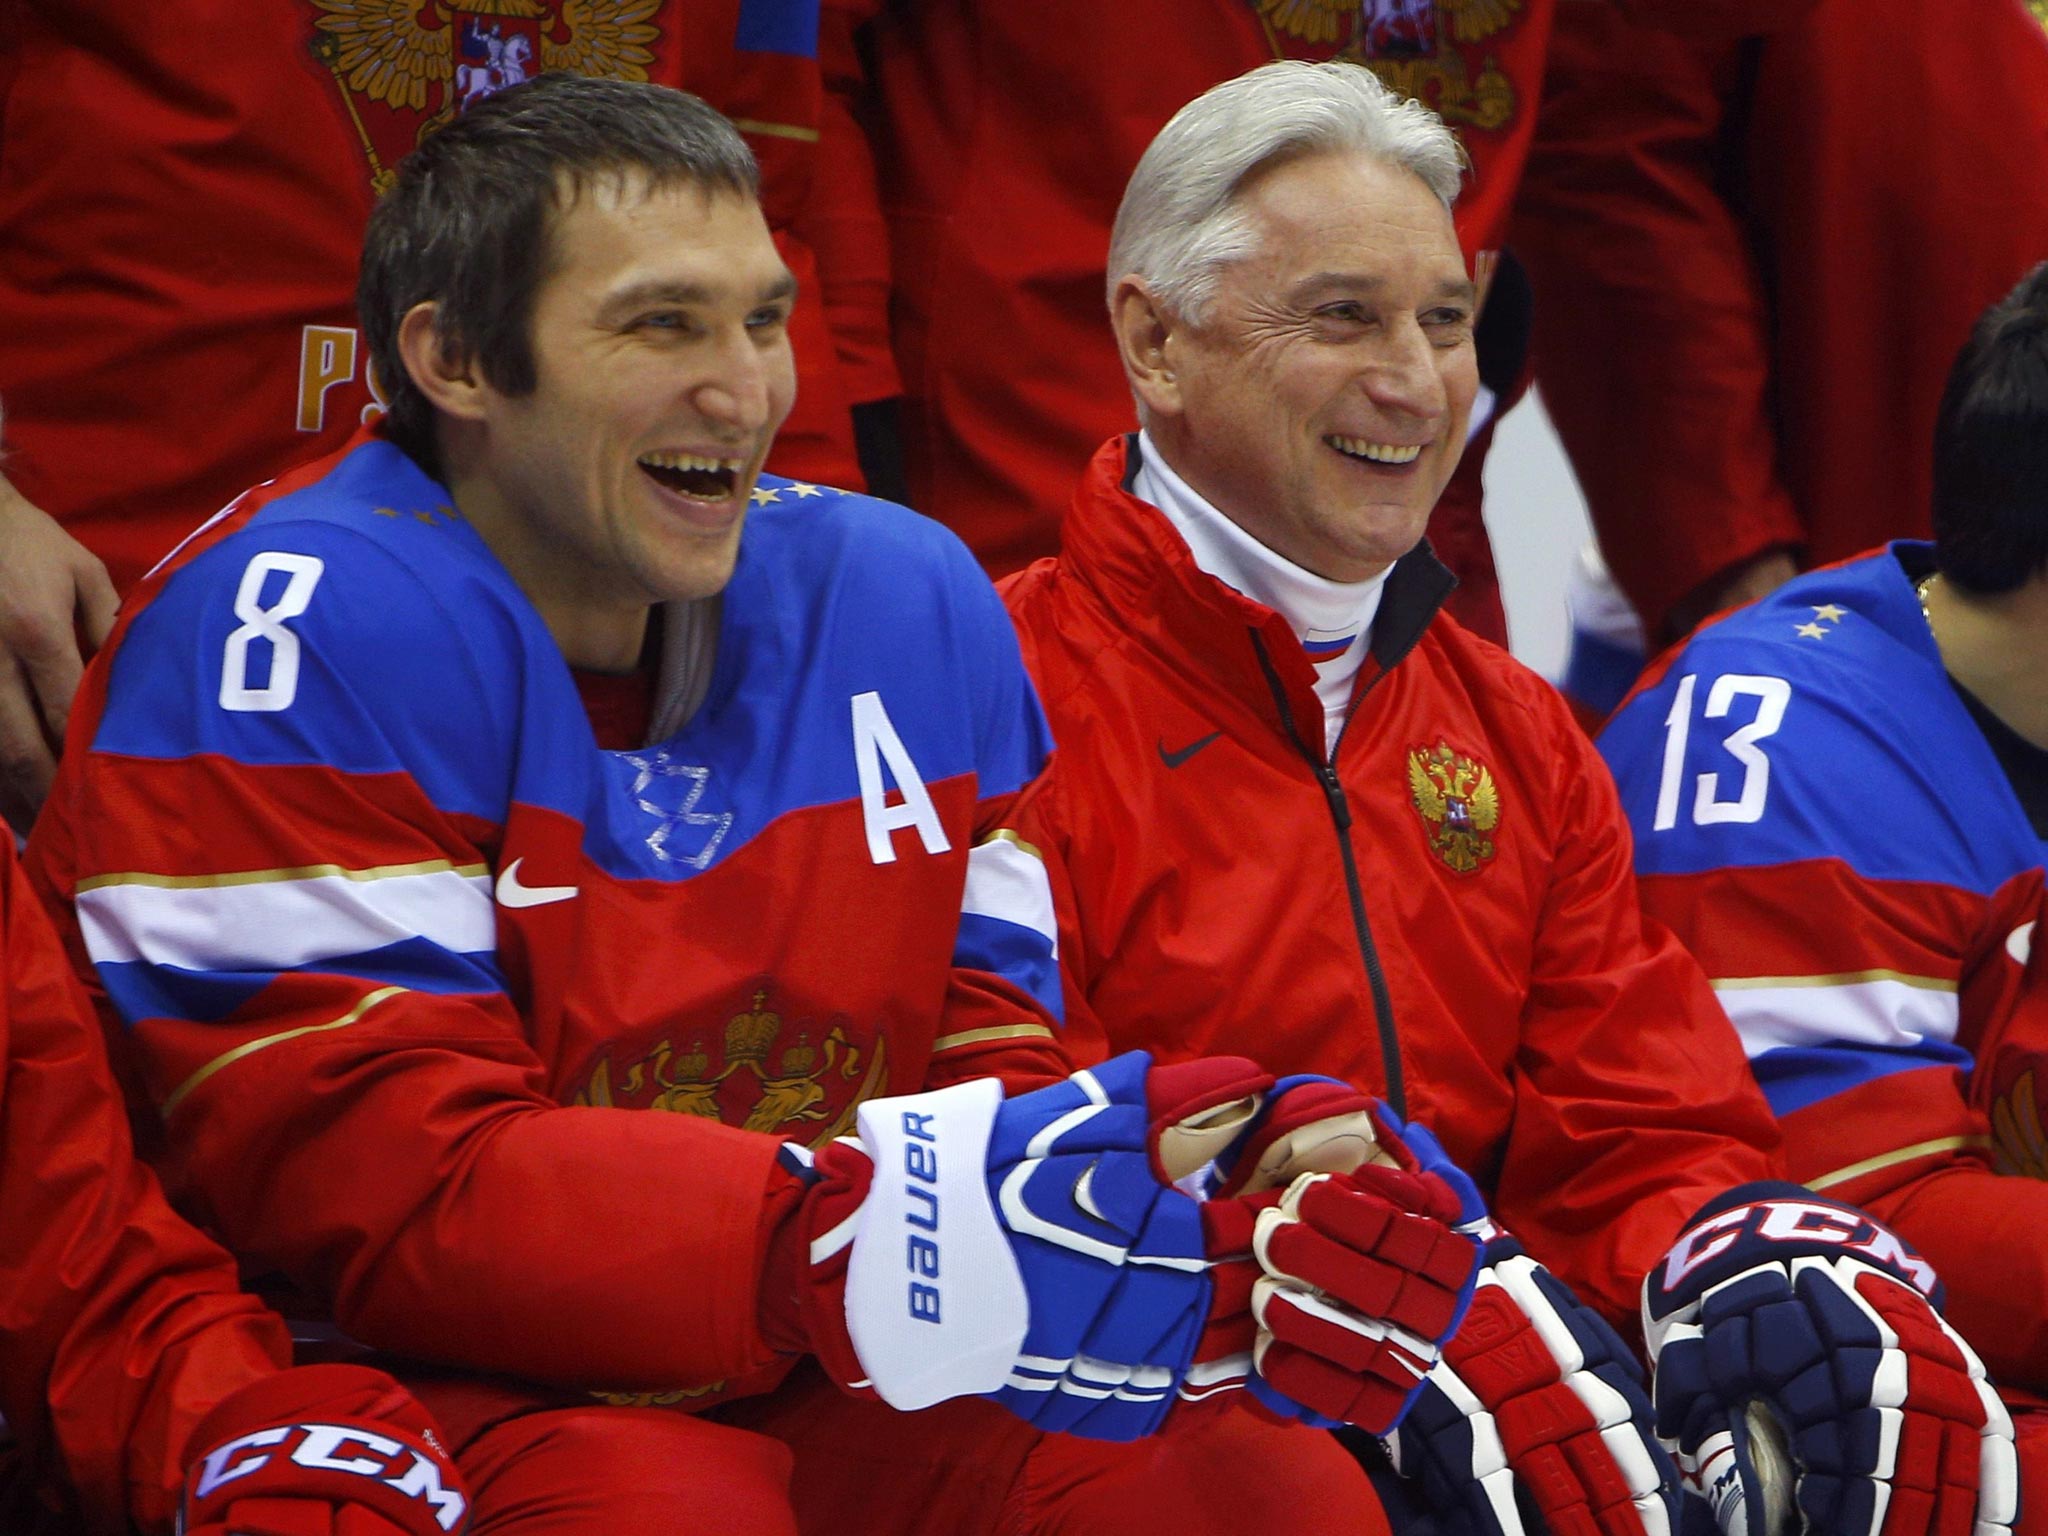 Alexander Ovechkin must guide his Russia side through a playoff
against Norway